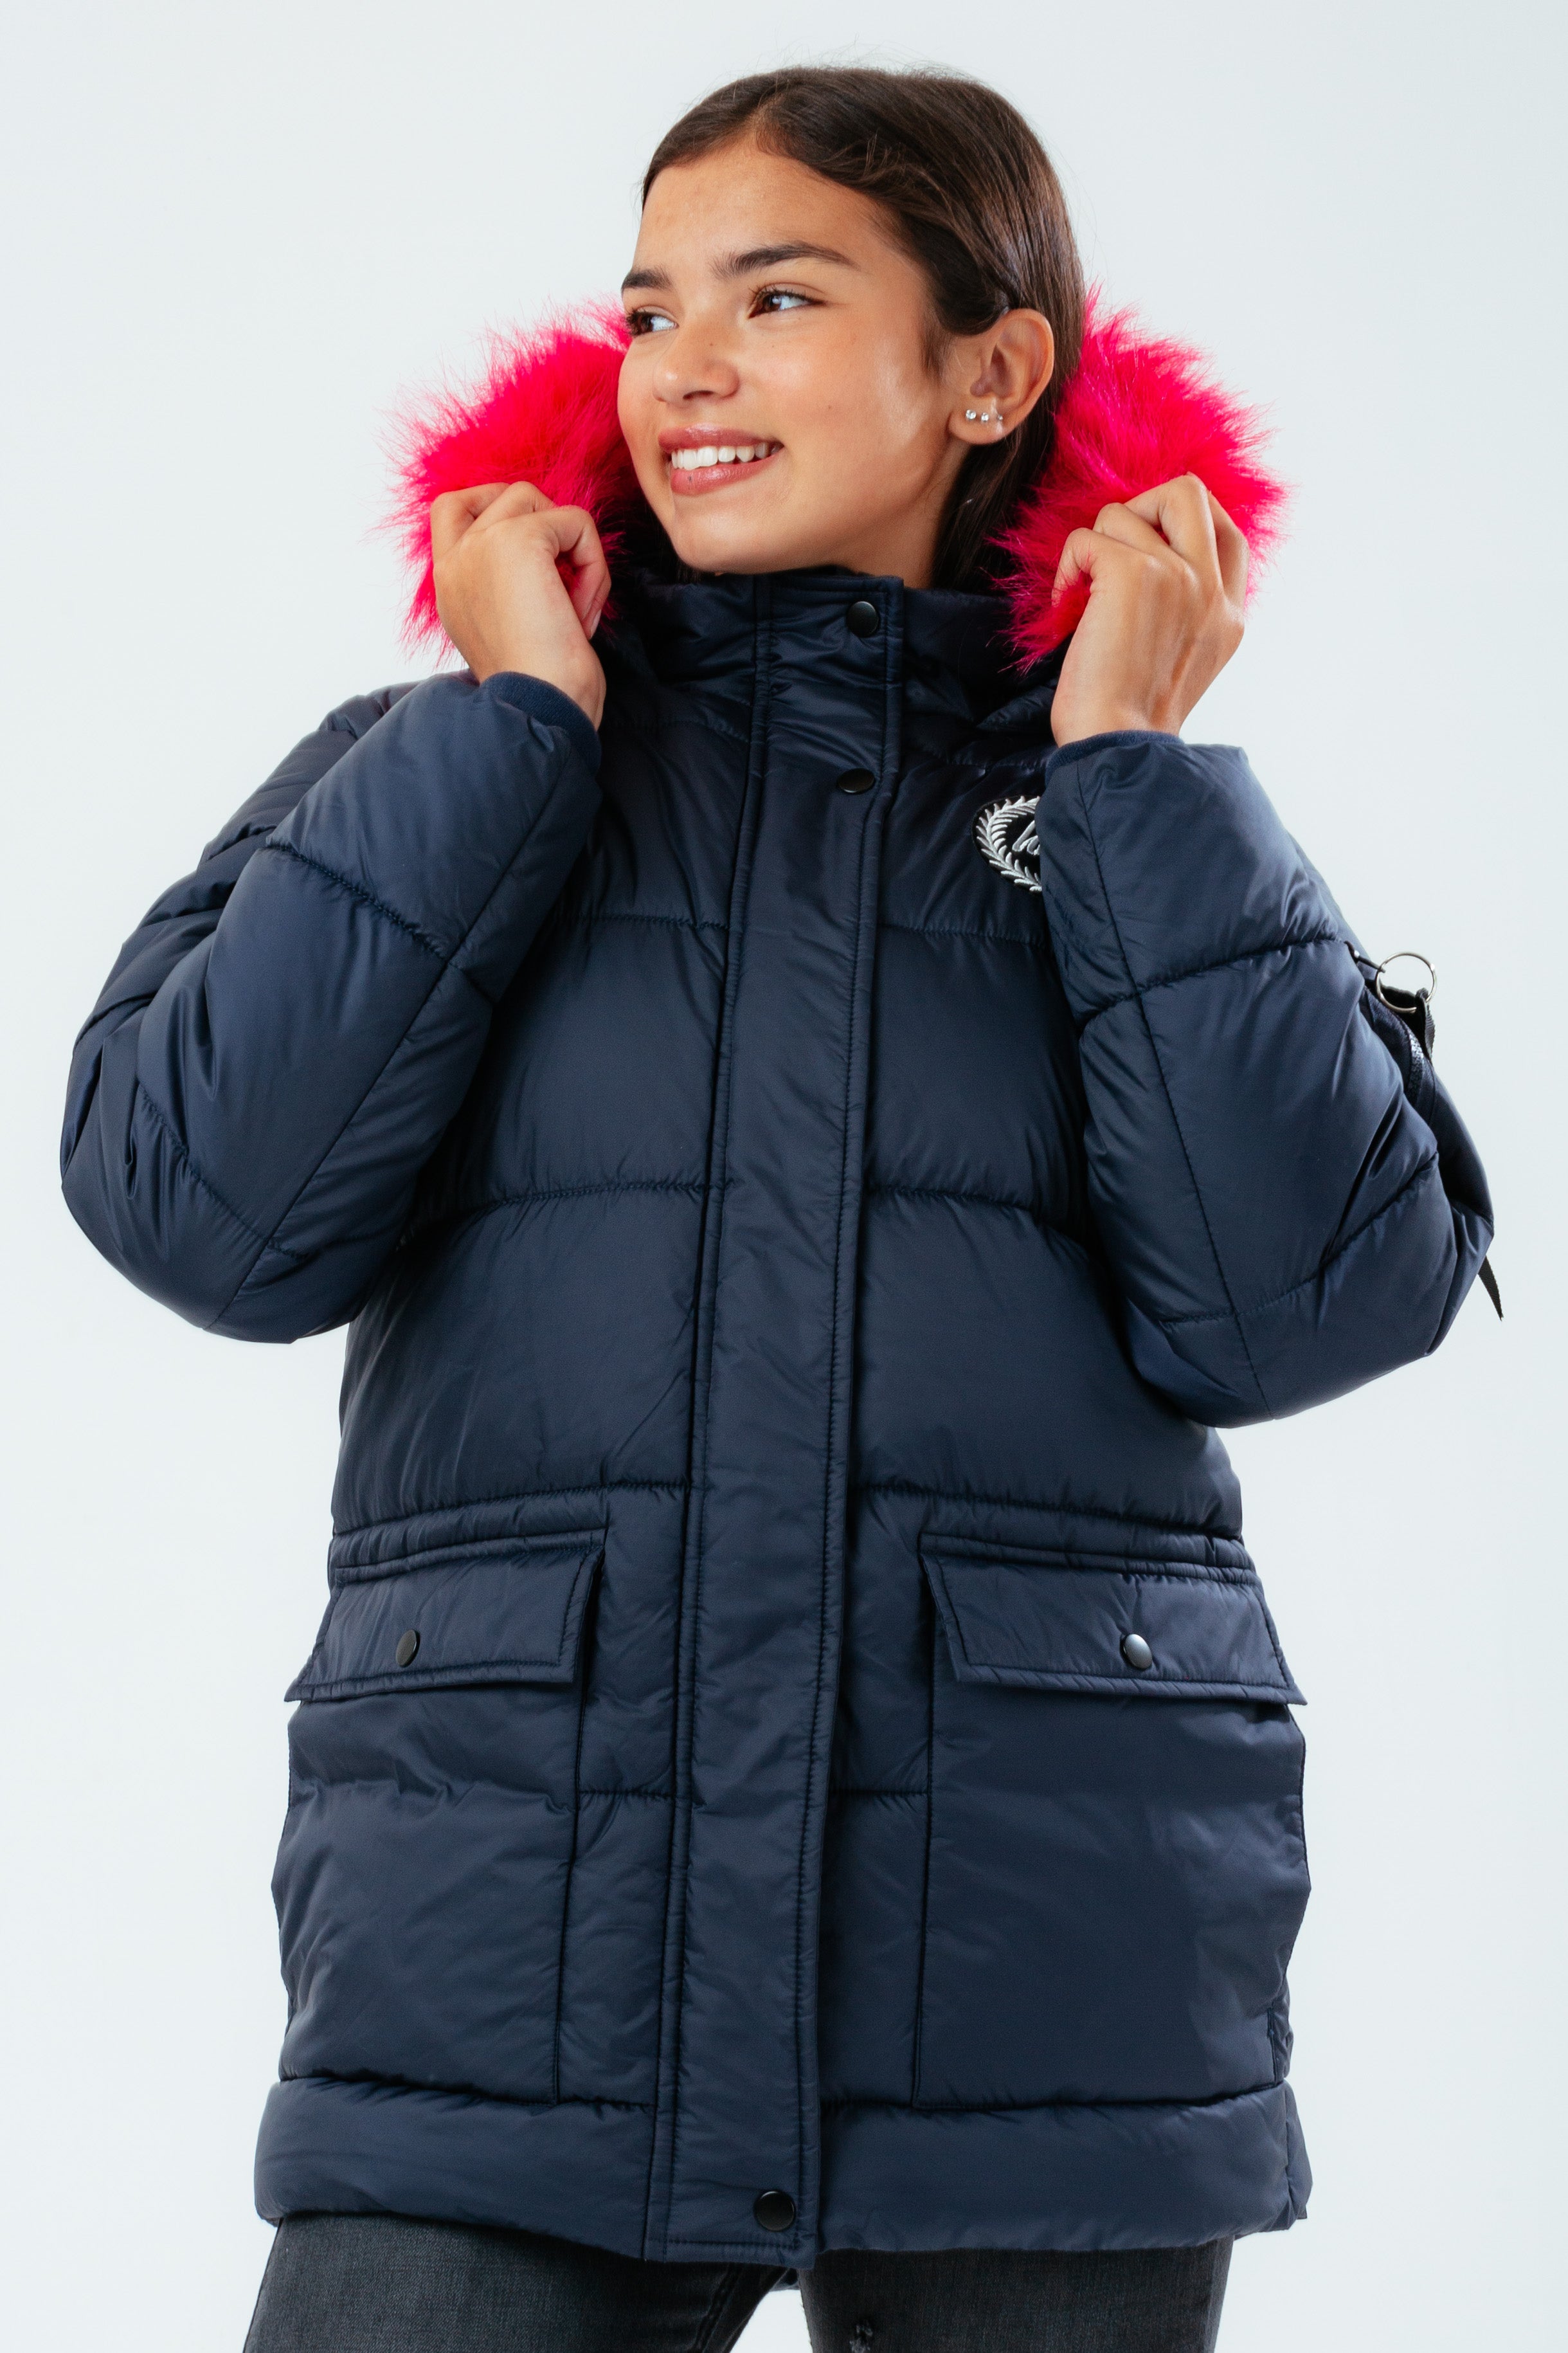 HYPE NAVY GIRLS EXPLORER JACKET WITH PINK FUR | Hype.